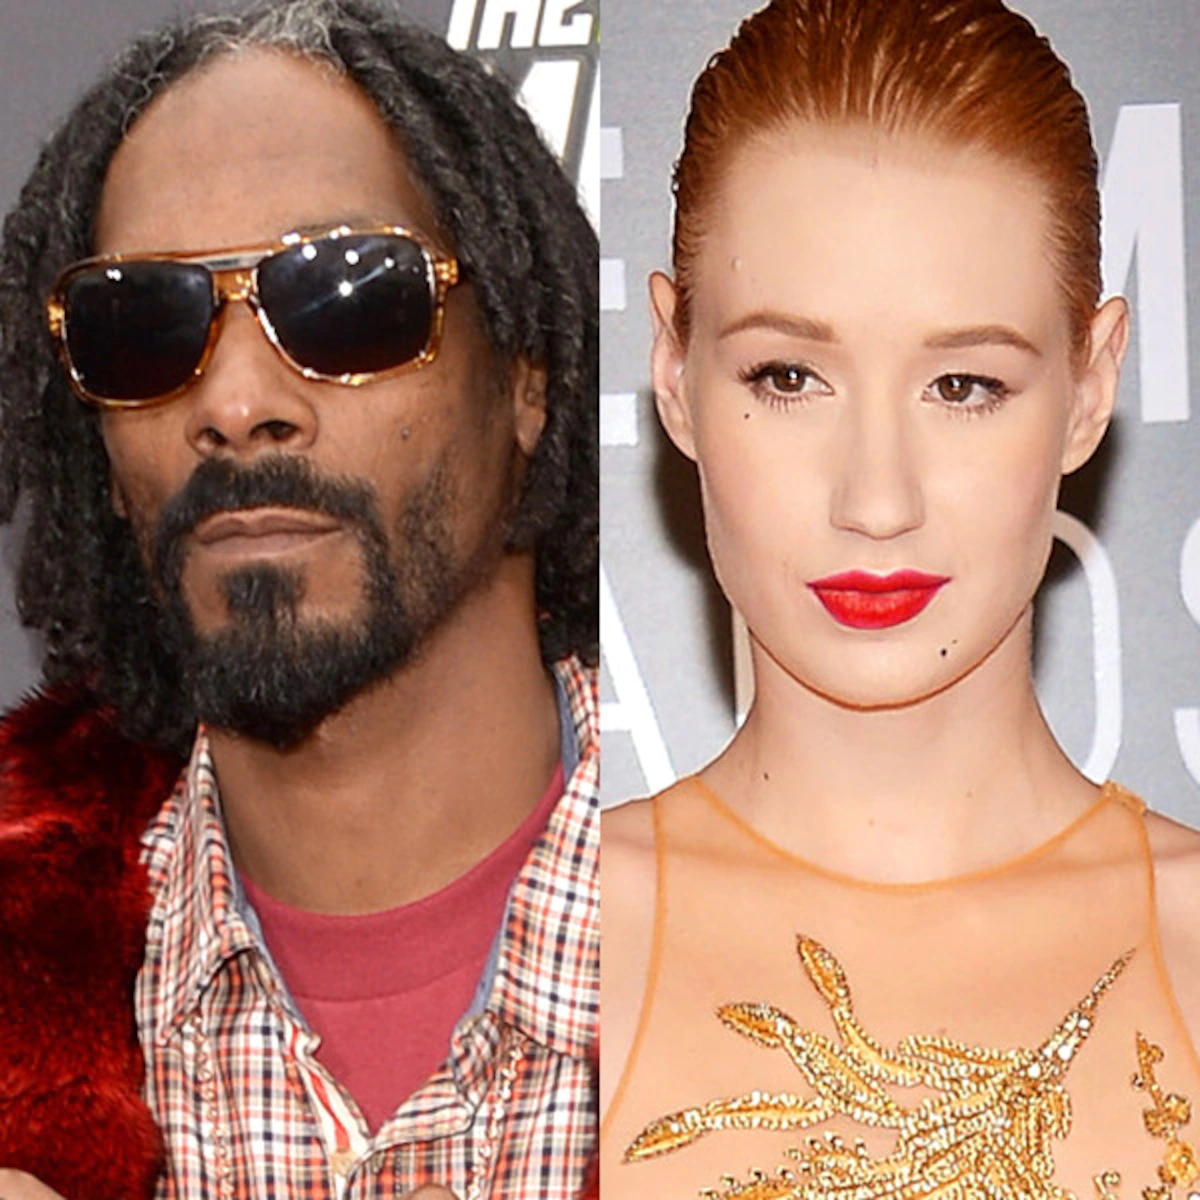 One of the most controversial celeb feuds: Snoop Dog and Iggy Azalea